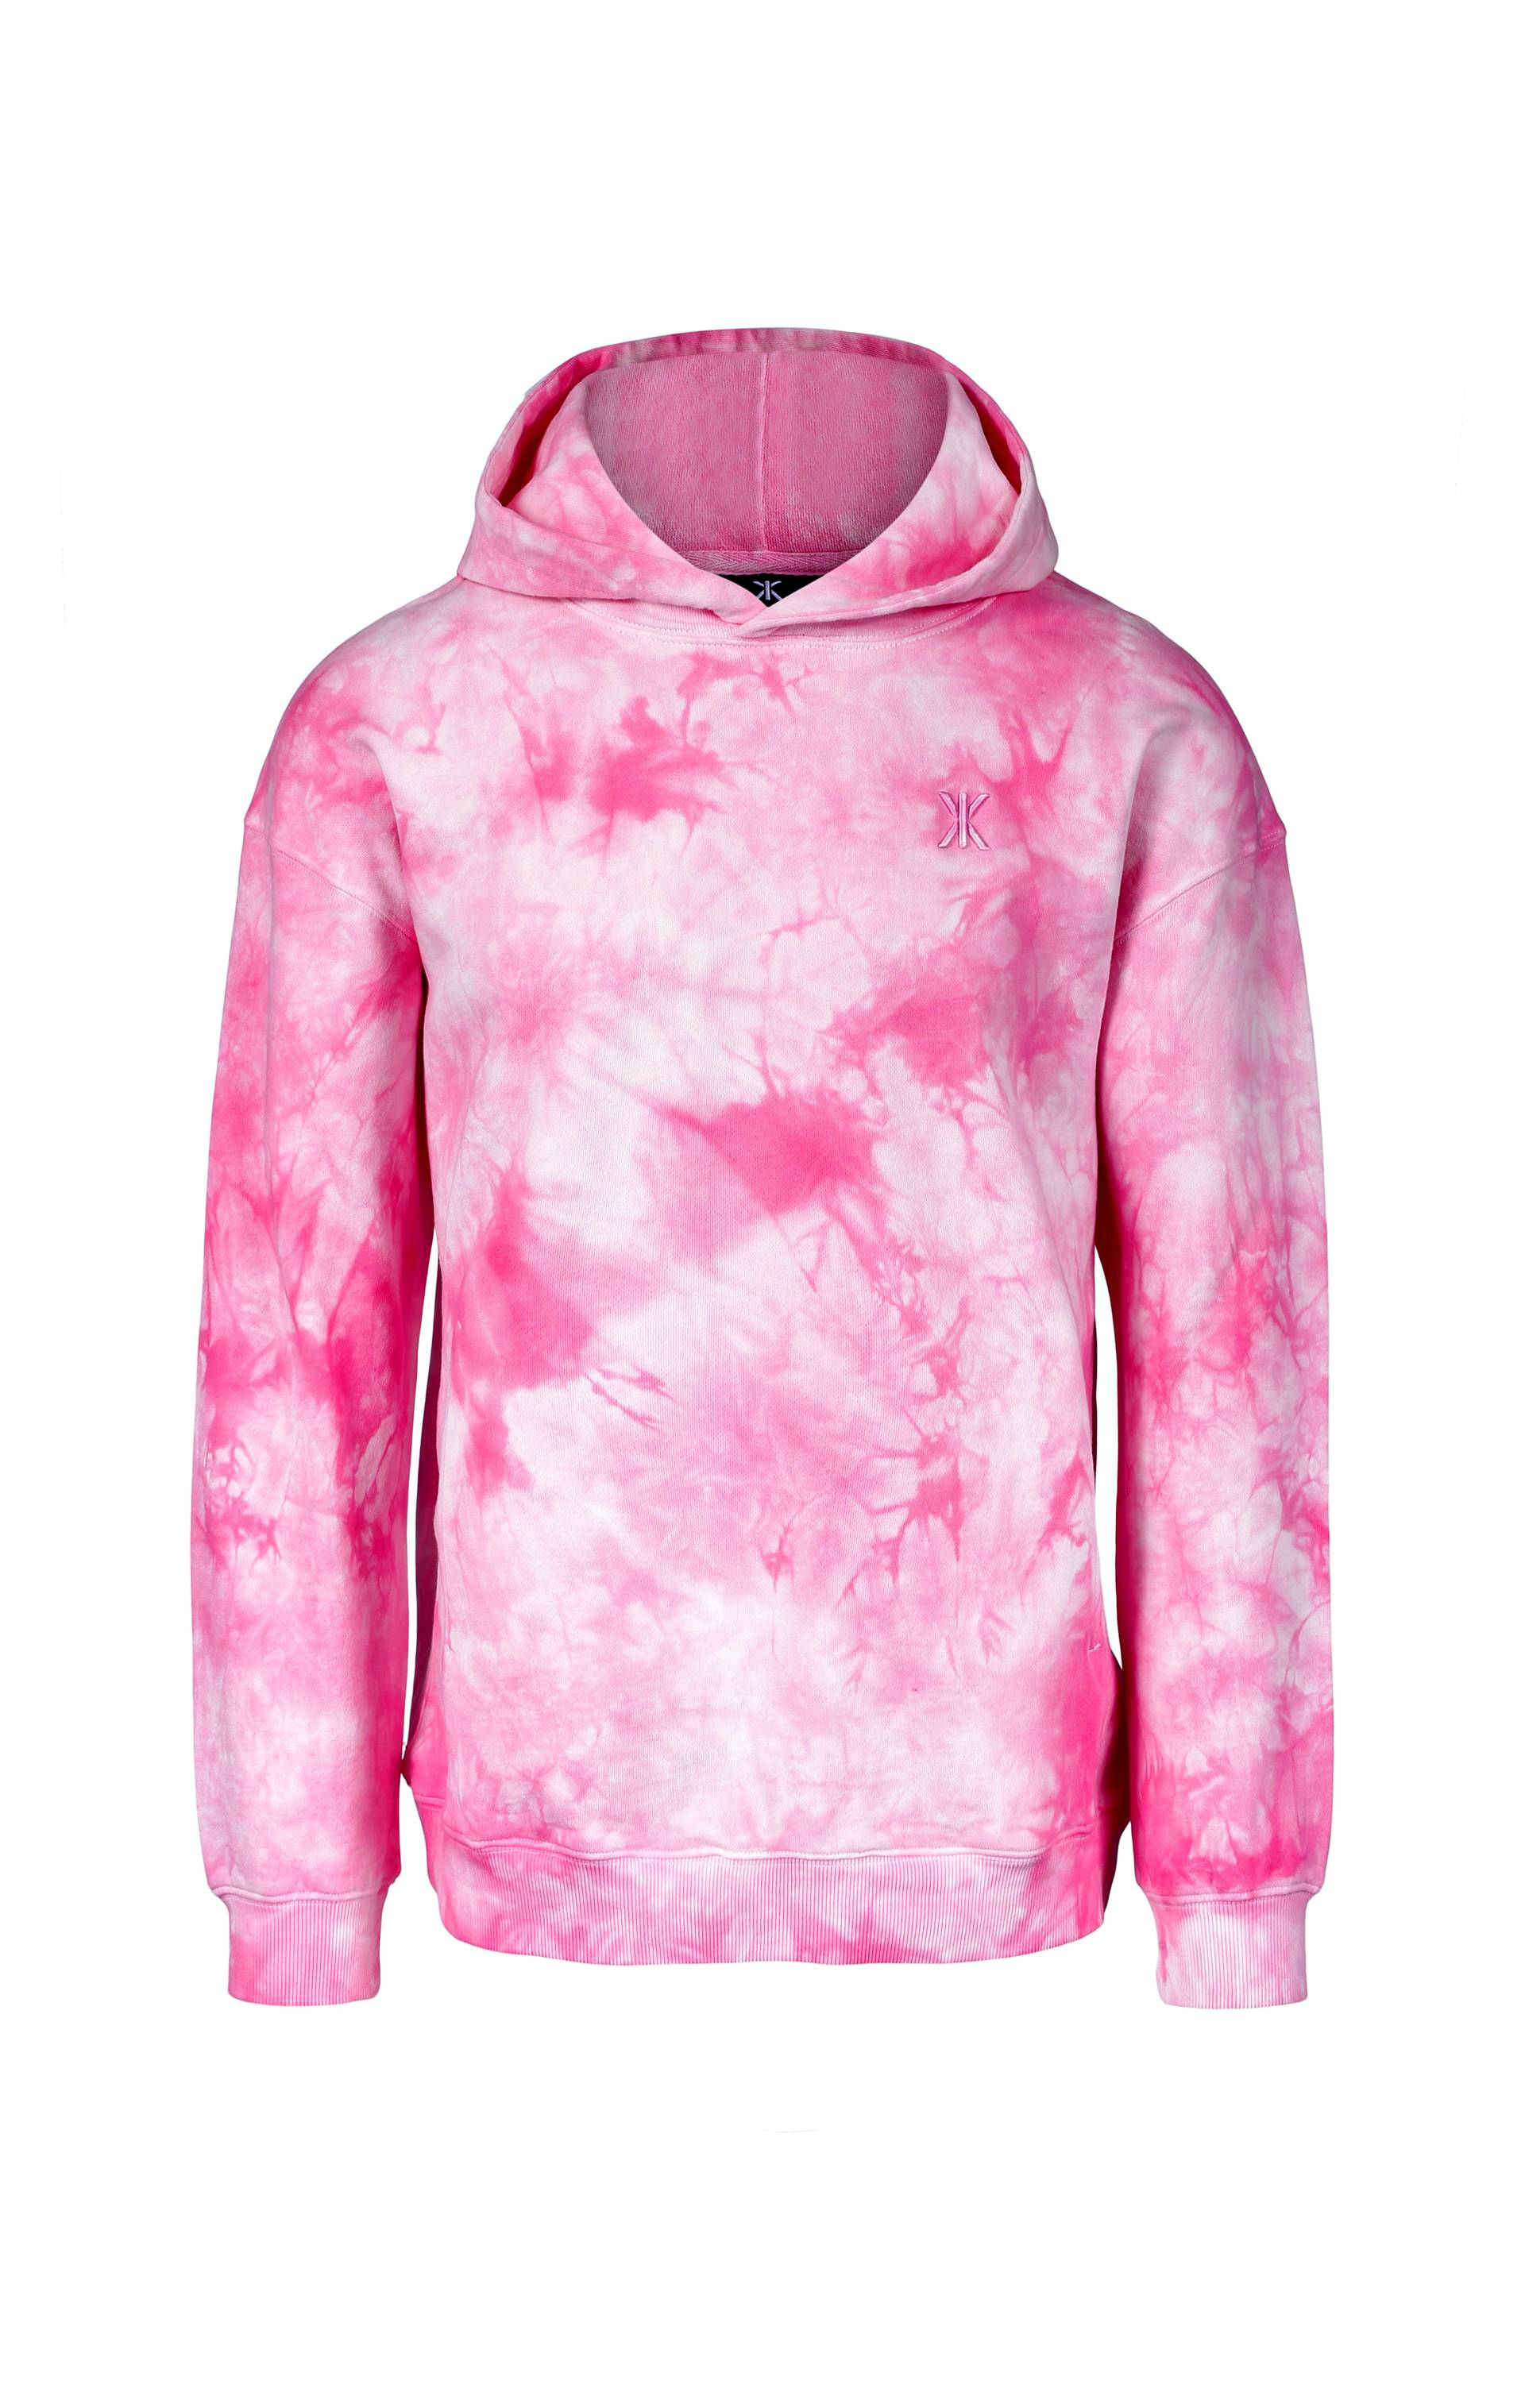 Tie Dye Hoodie: A Do-It-Yourself Guide - Chaotically Yours